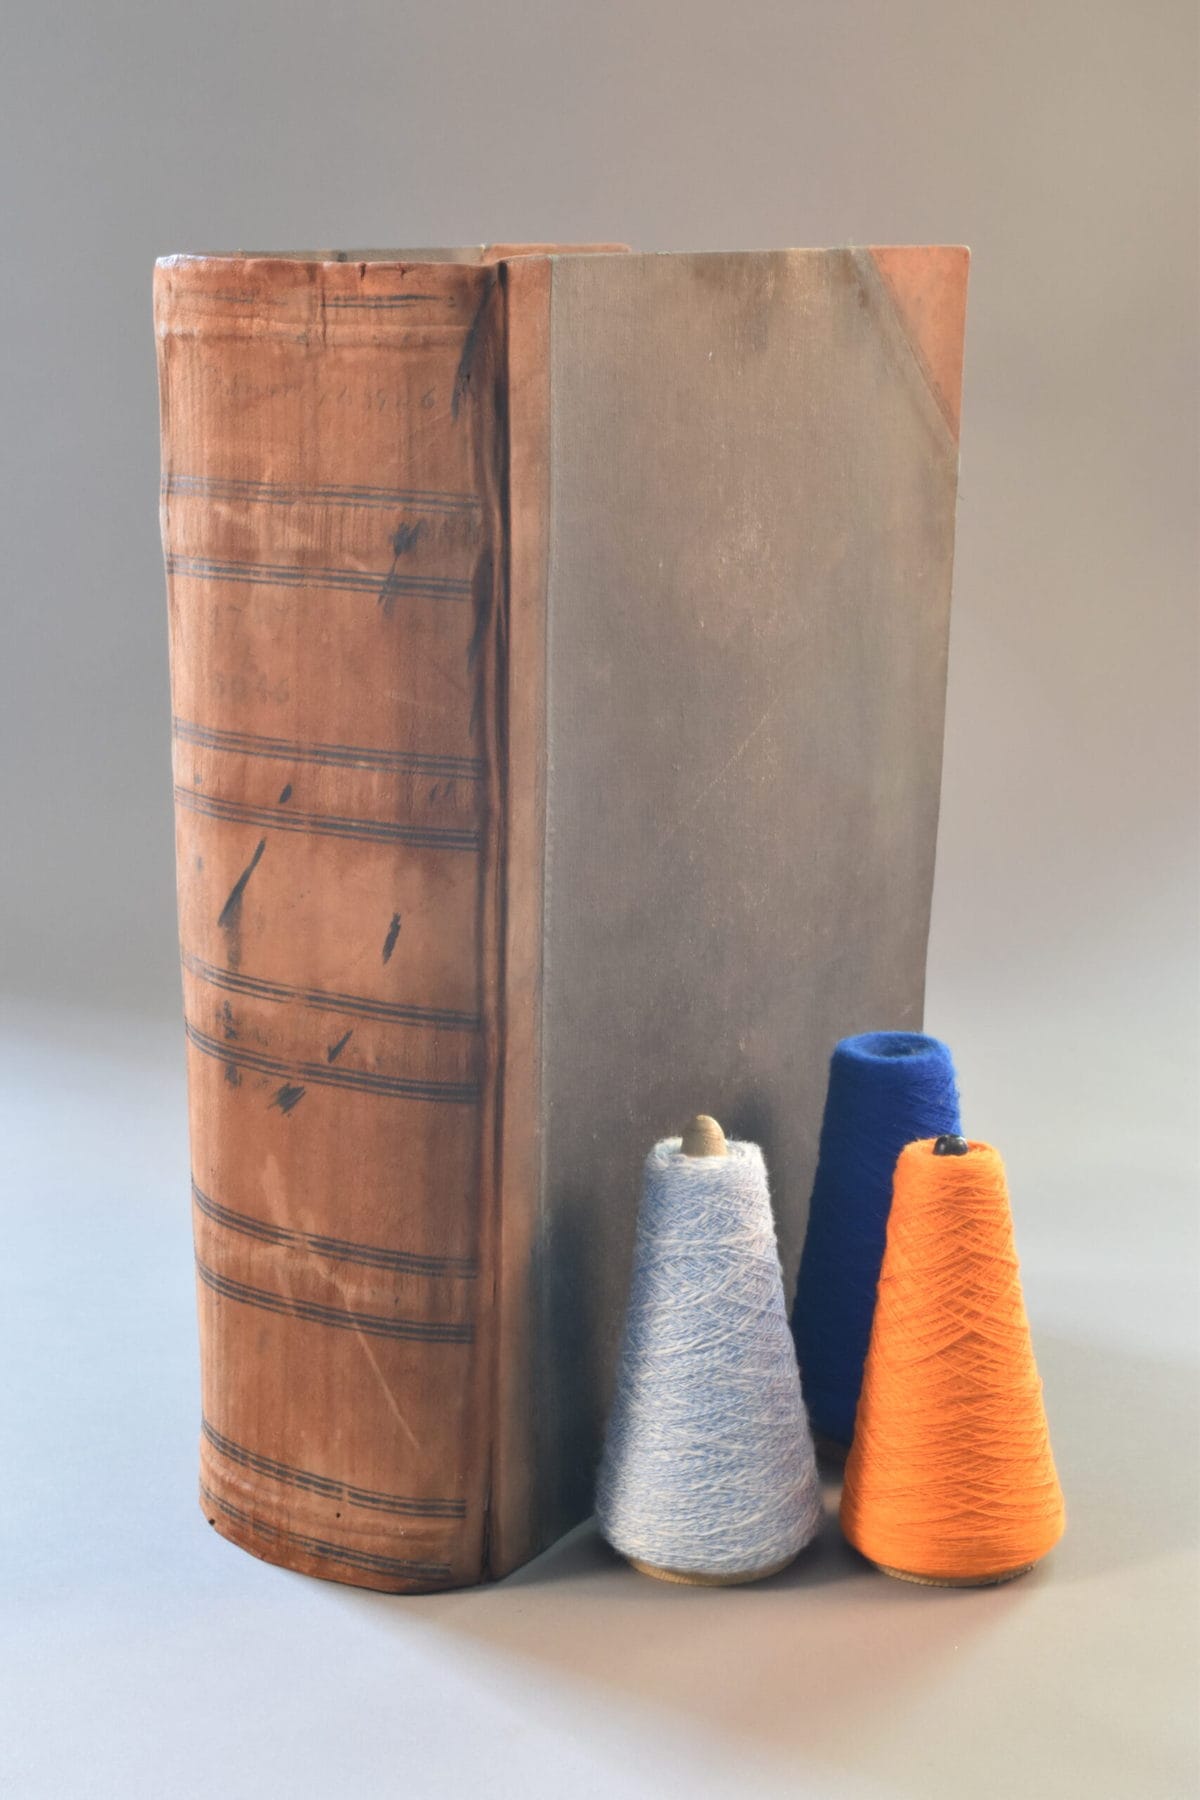 image description: an old book, the image focussing on its spine